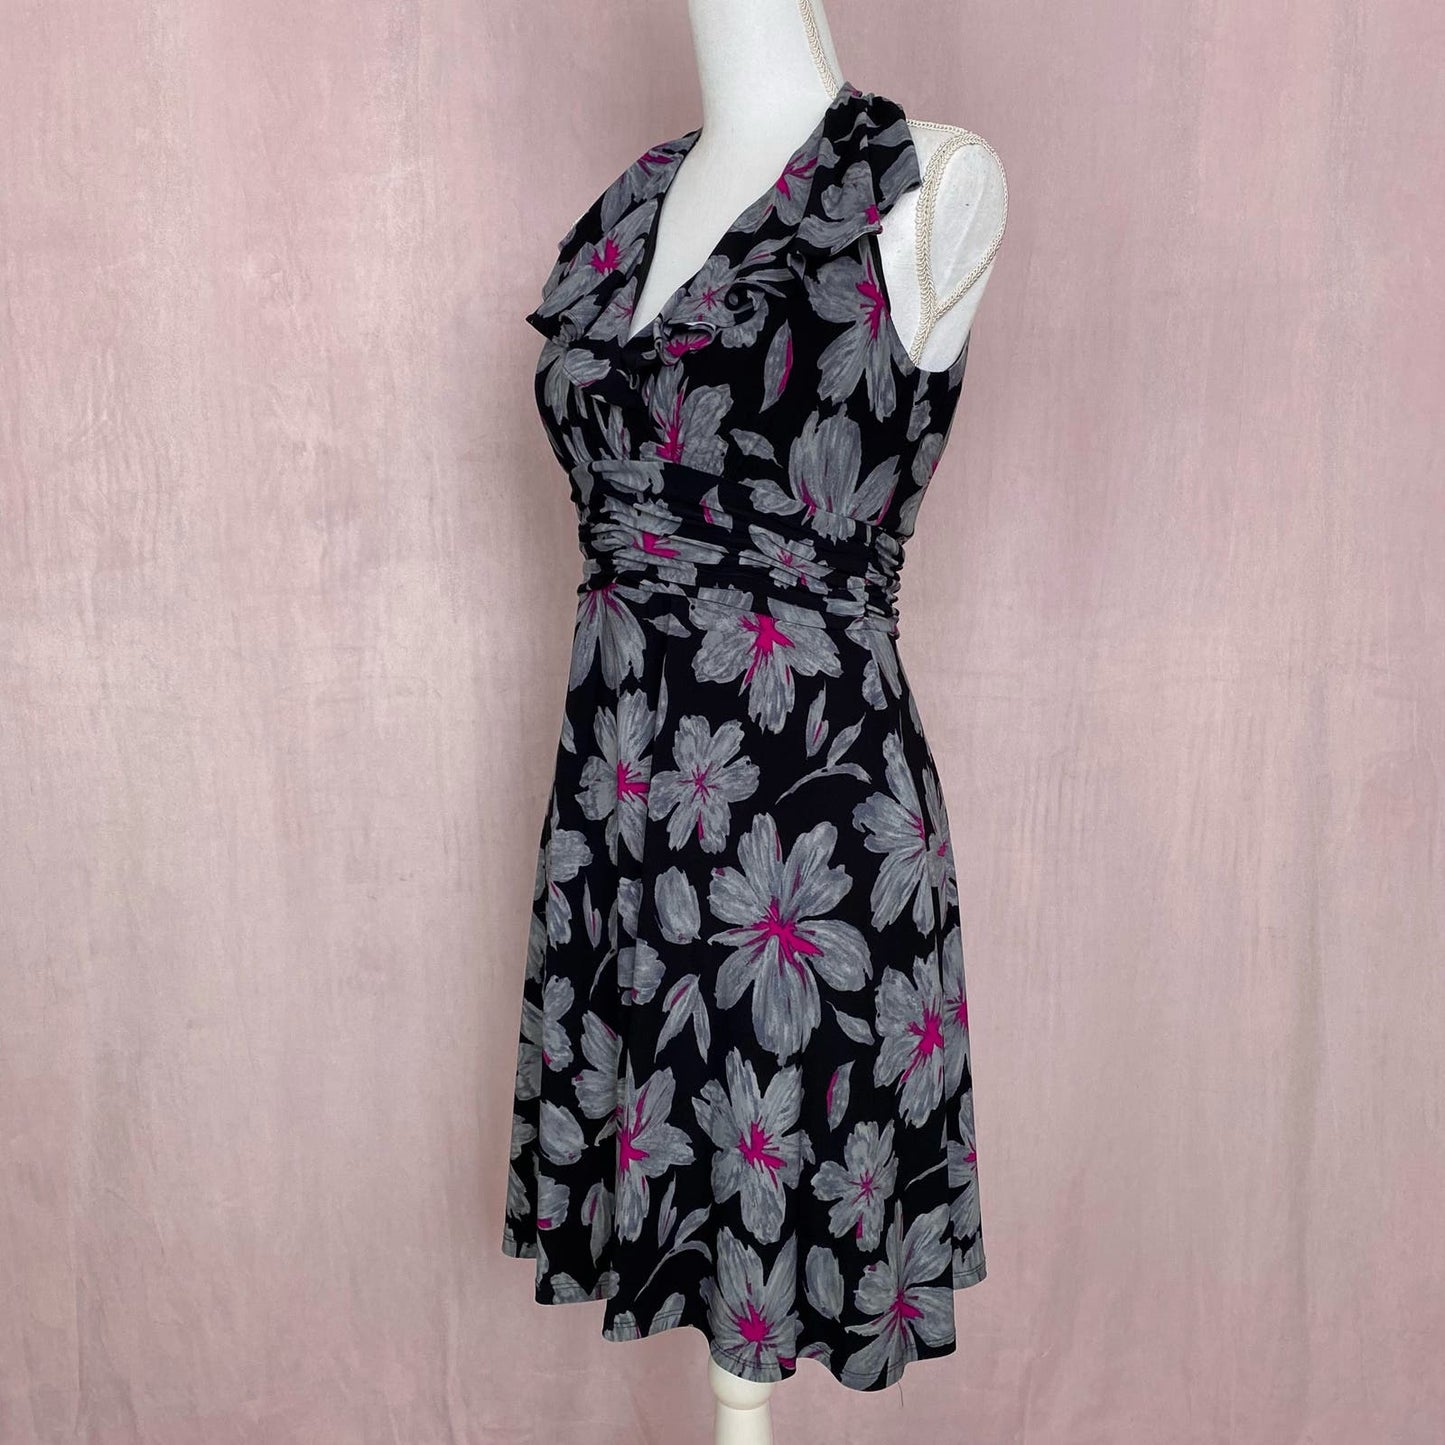 Secondhand Evan Picone Tropical Floral Fit & Flare Cocktail Dress, Size 4